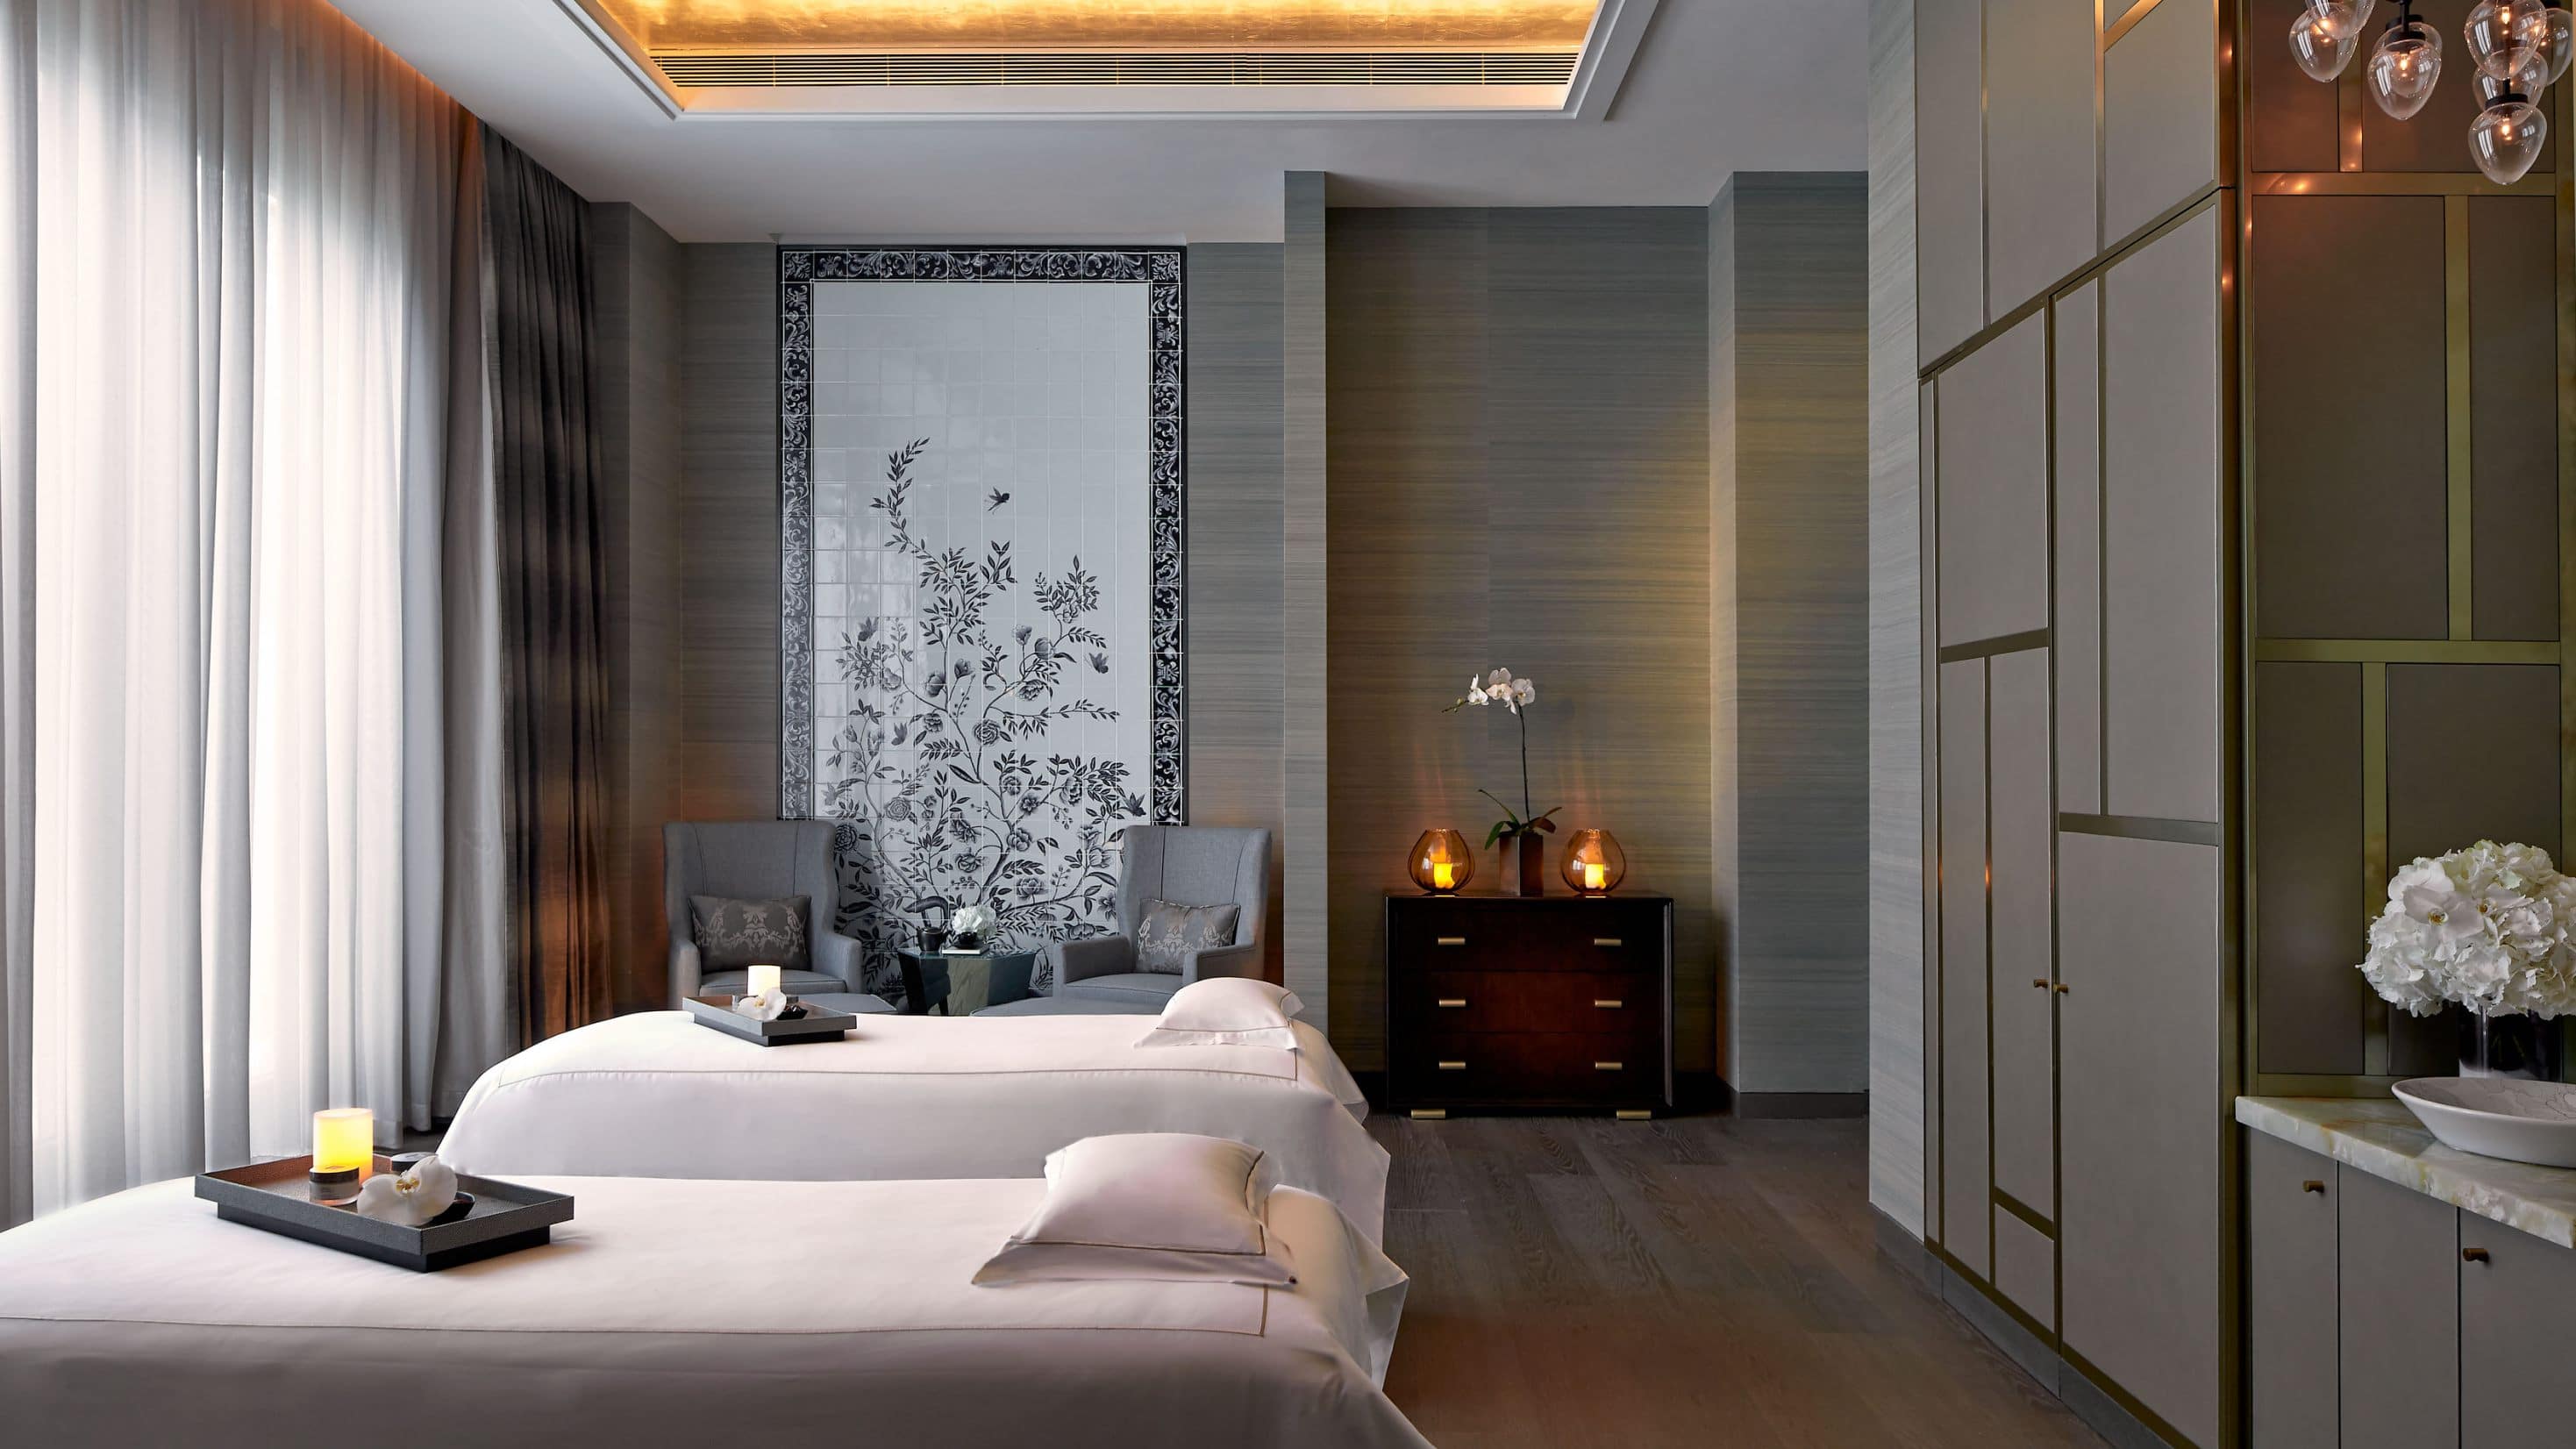 Spa review: A luxe R&R session for stressed-out bridesmaids at ESPA, The Ritz-Carlton Macau